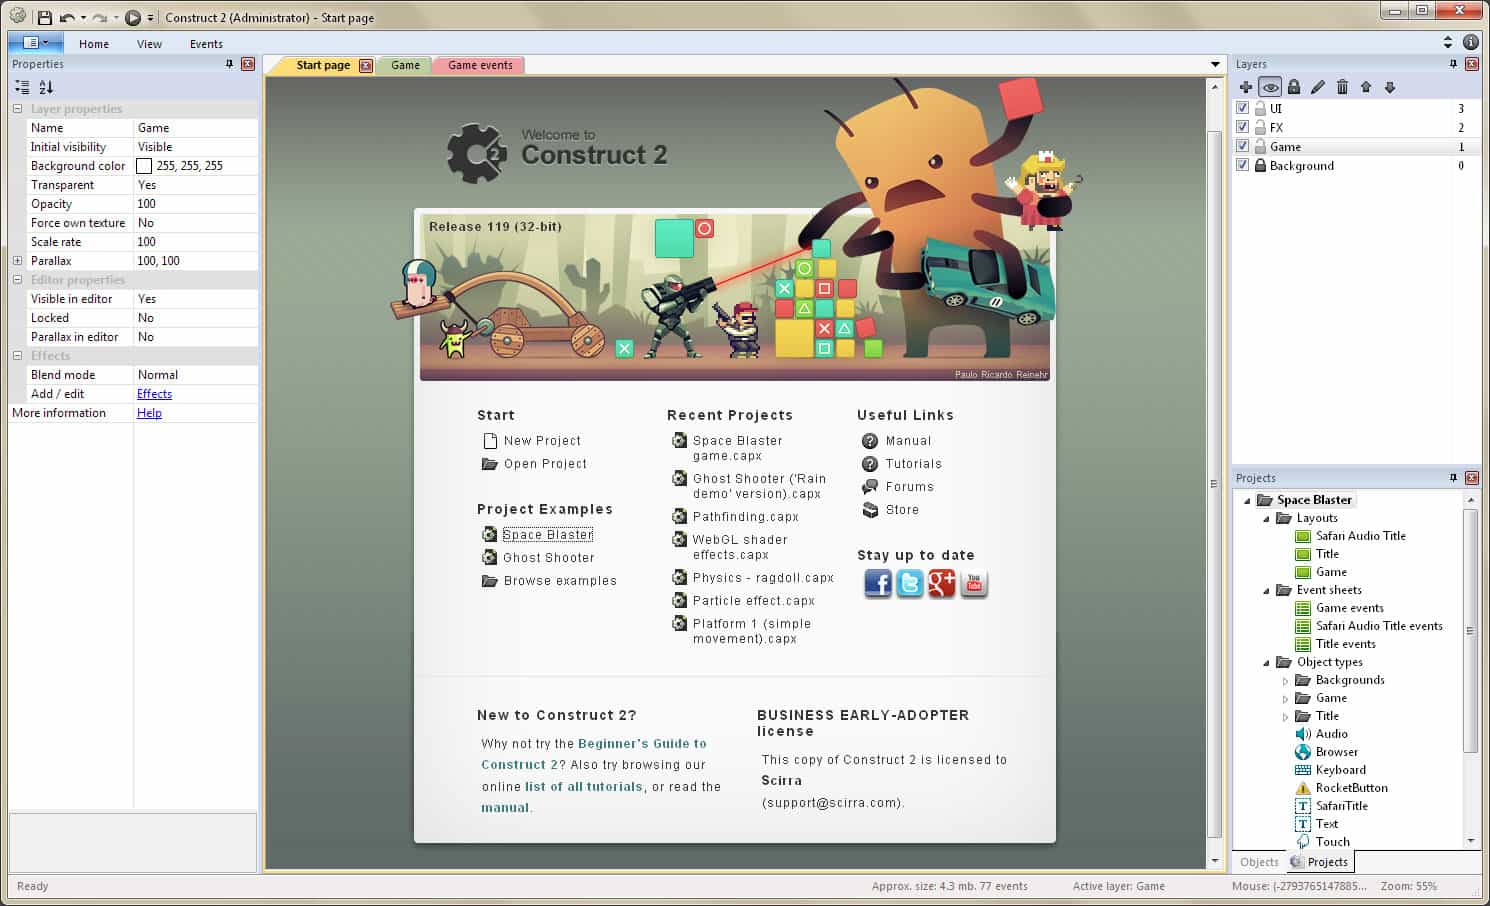 Construct 3 home screen, one of the best game design software